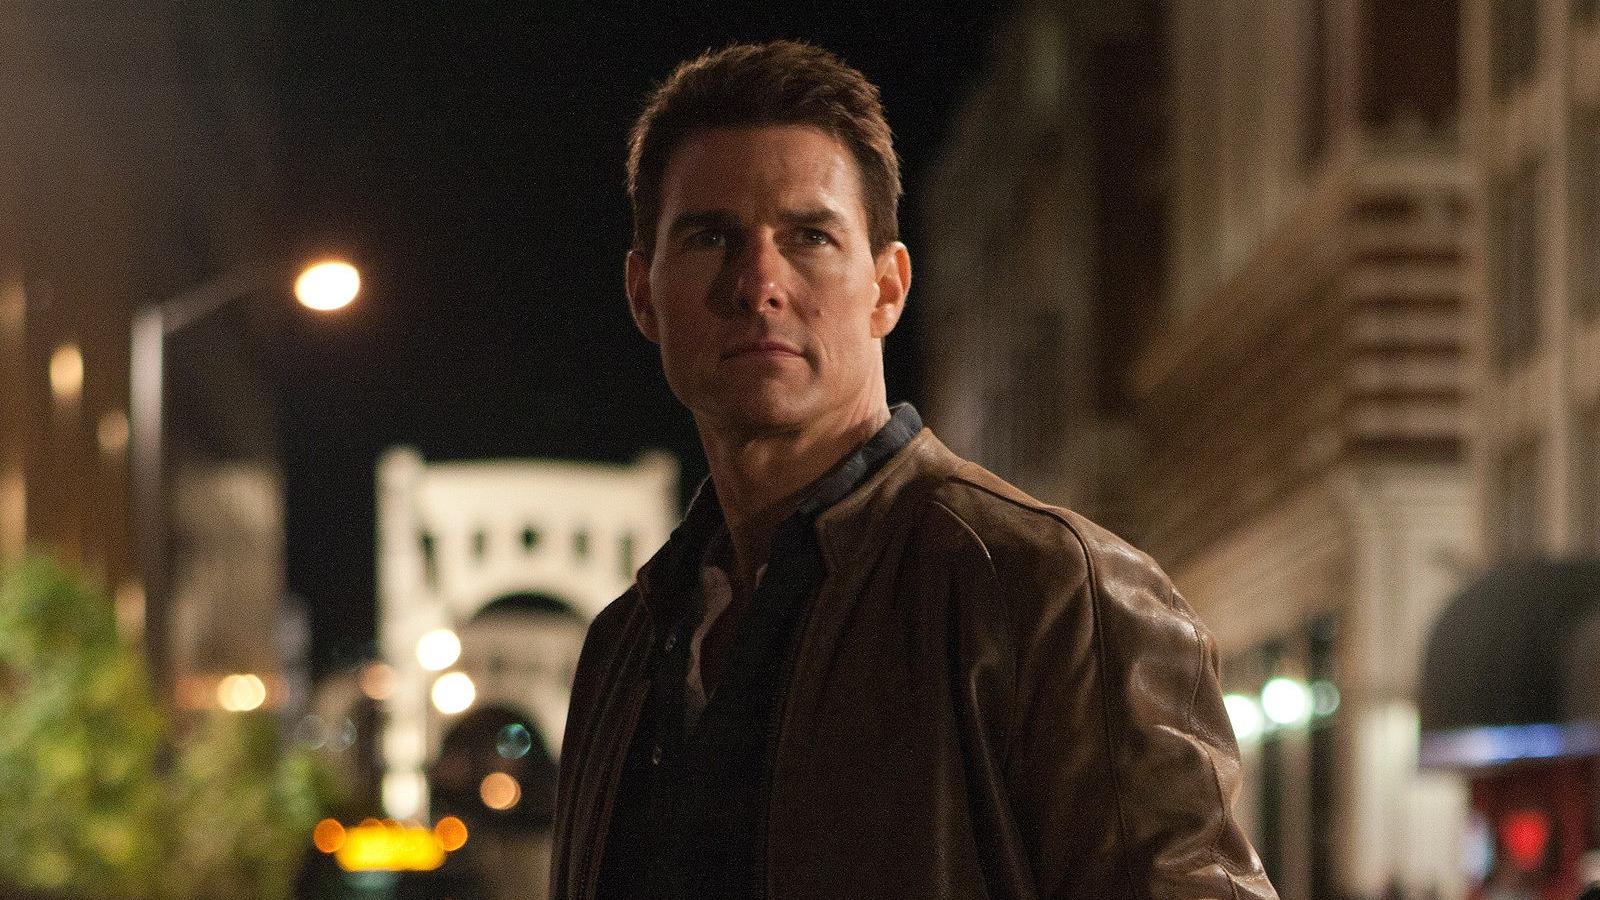 Tom Cruise in the Jack Reacher movies